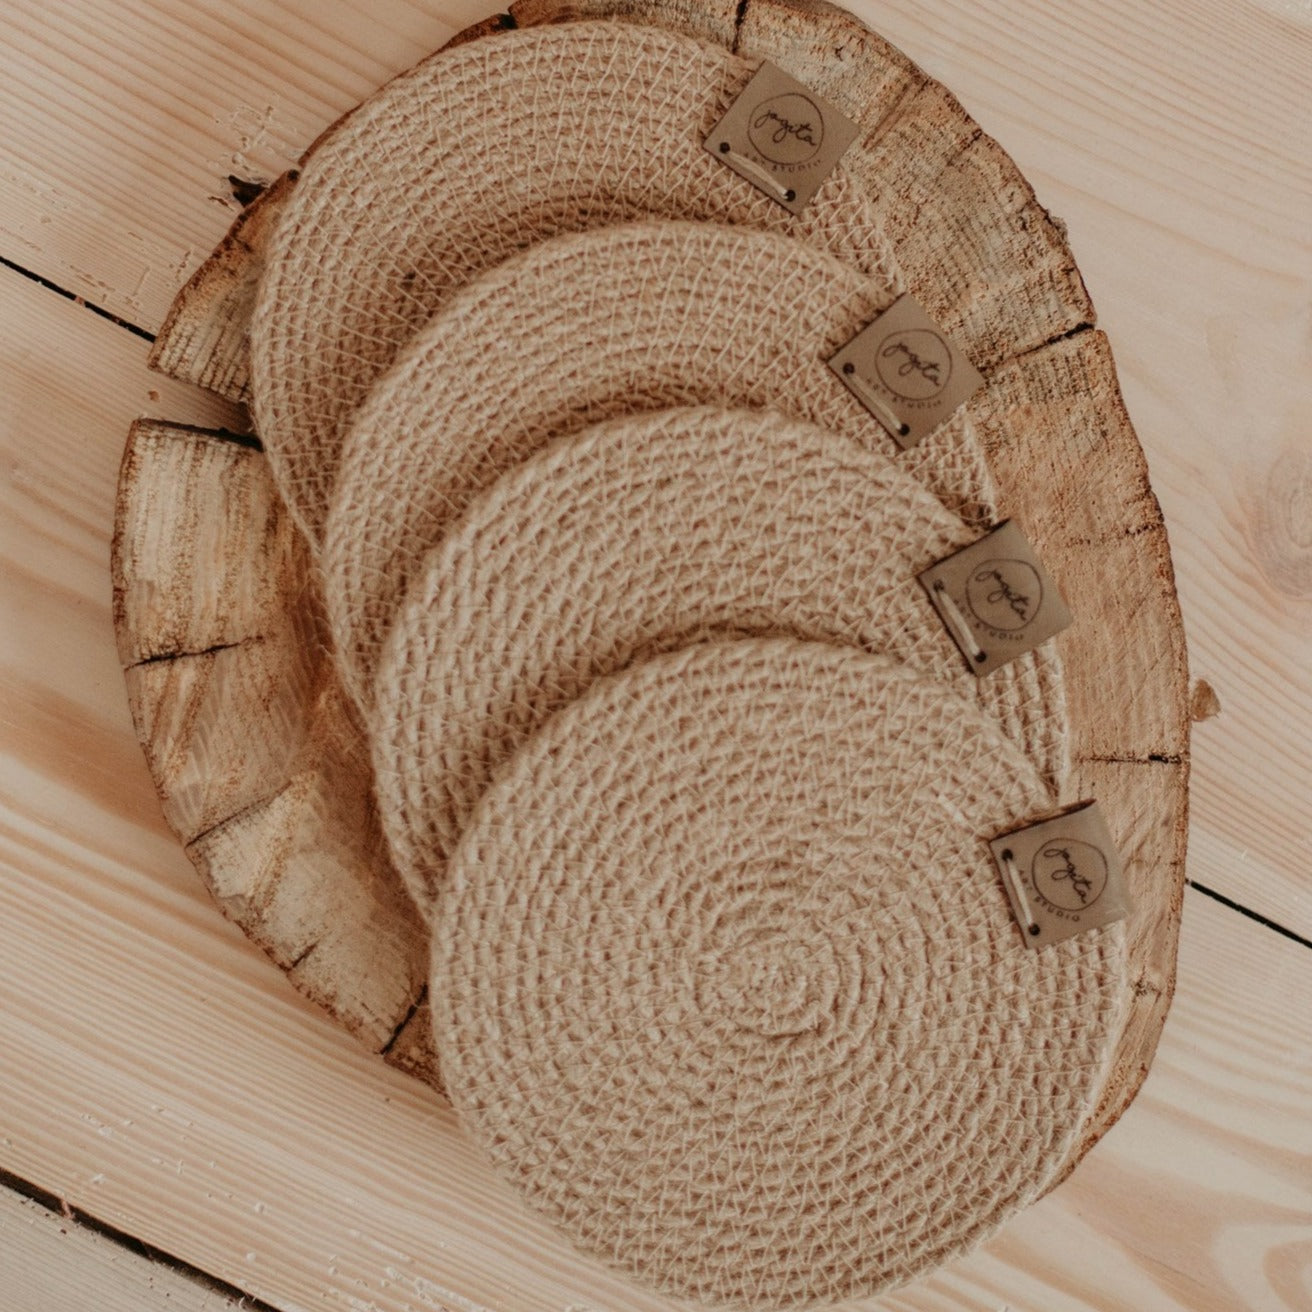 Add a touch of rustic charm to your dining room with these jute coasters